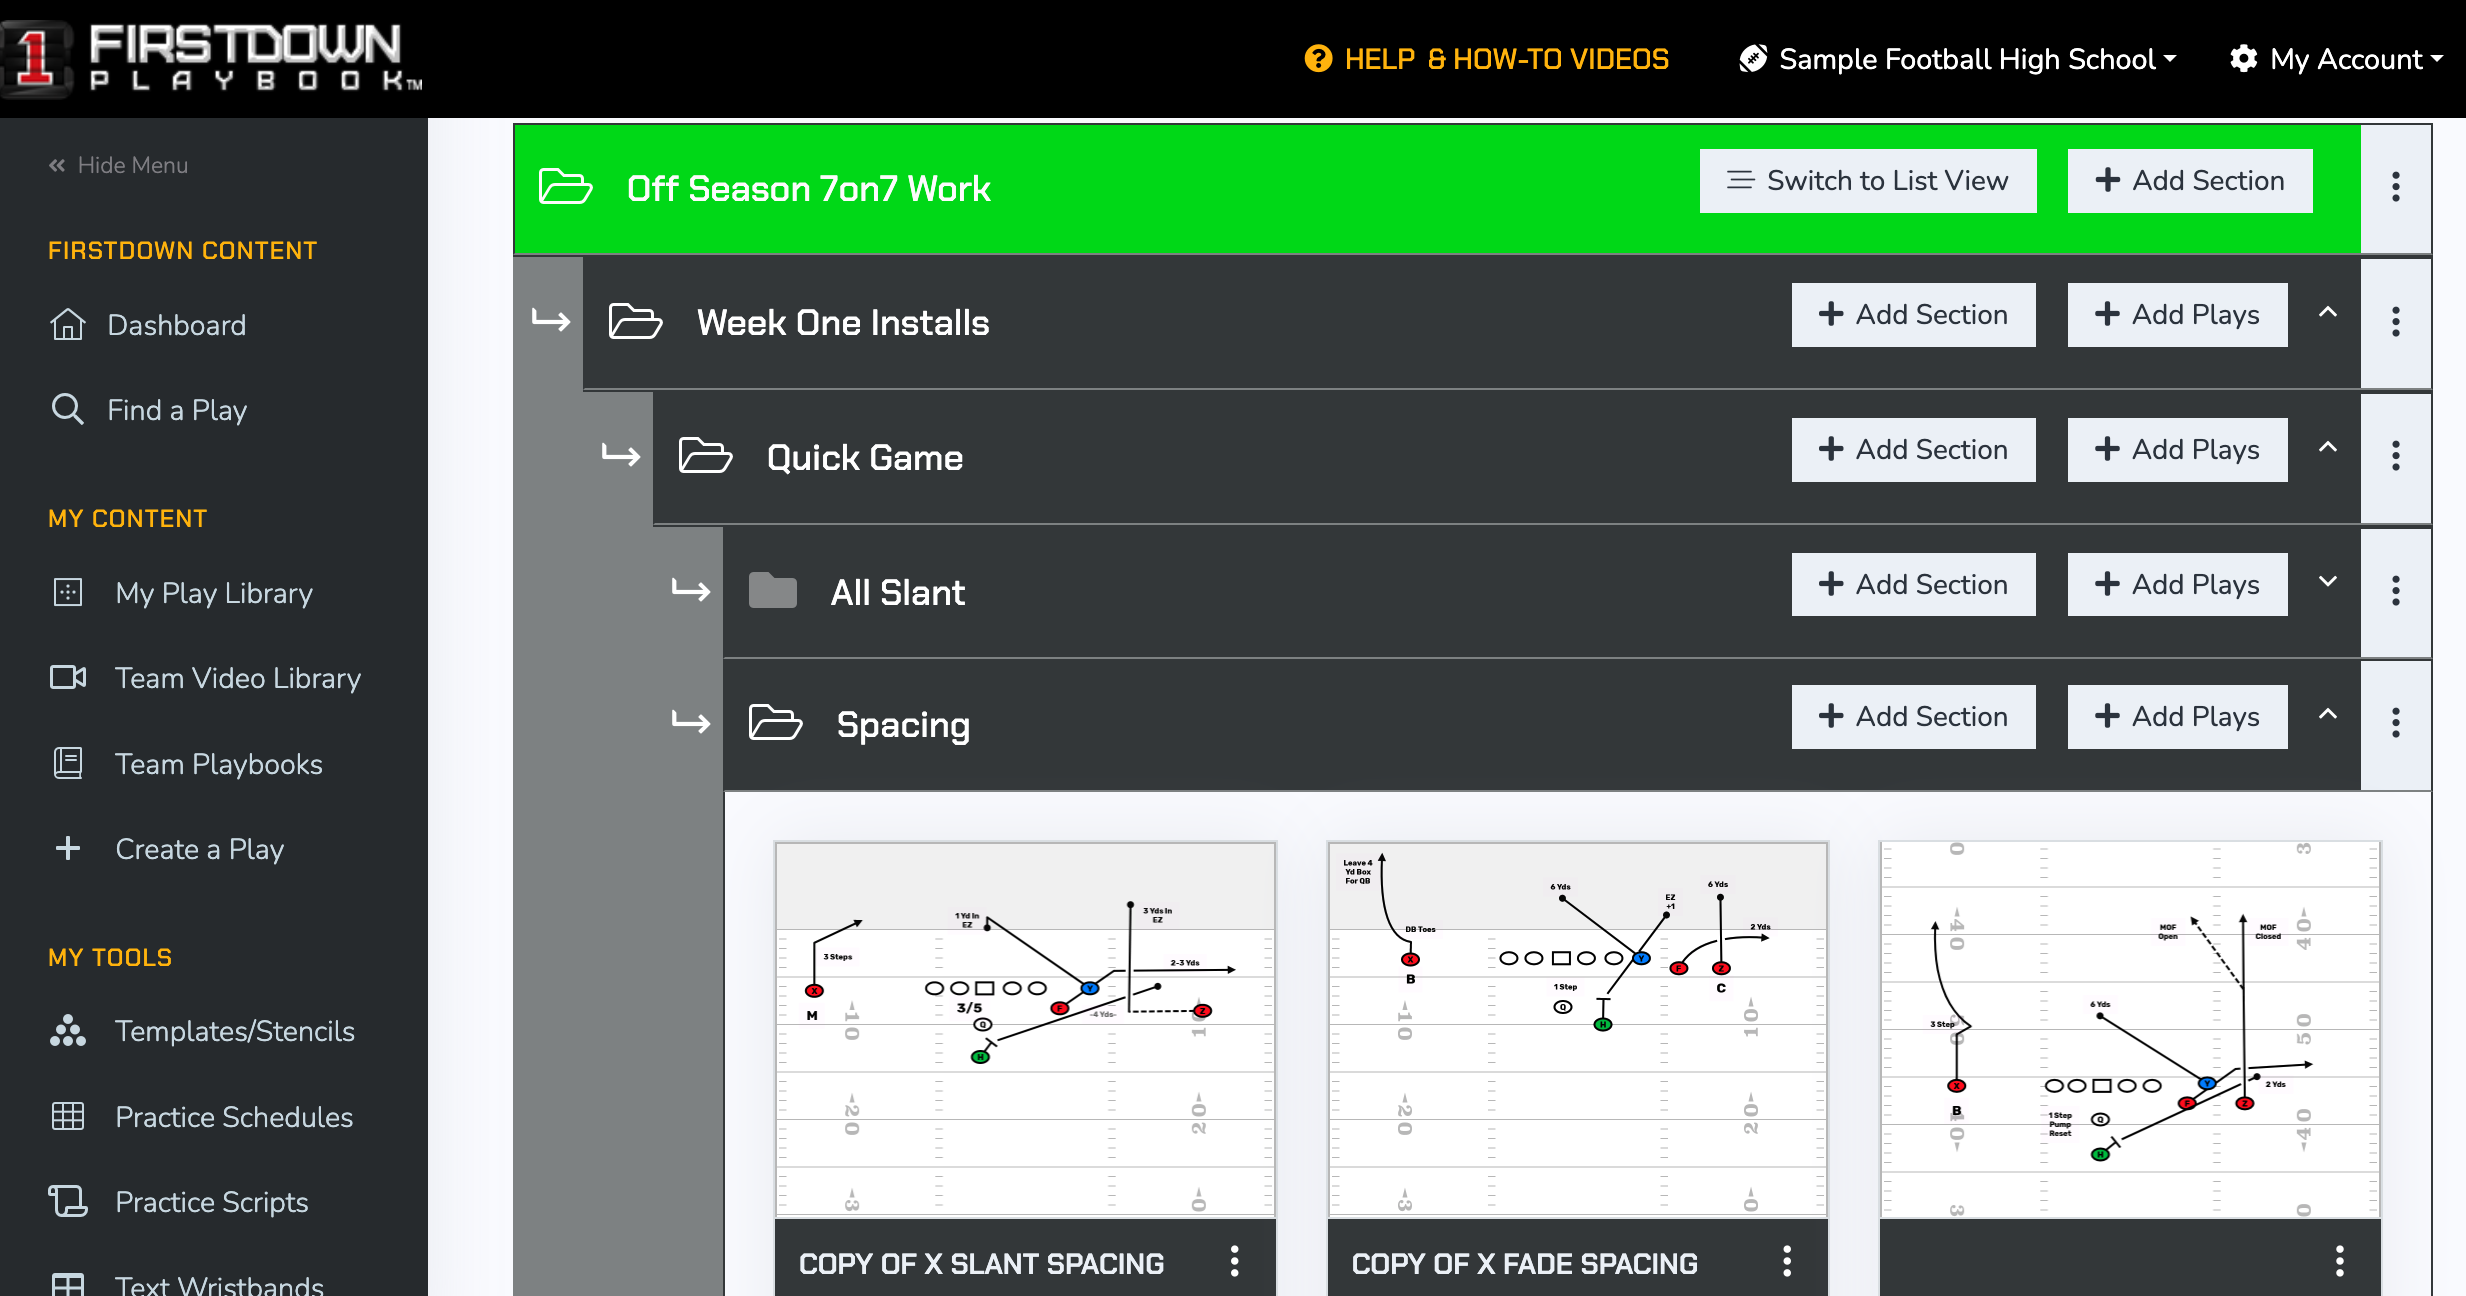 A 7on7 PlayBook Like You’ve Never Seen